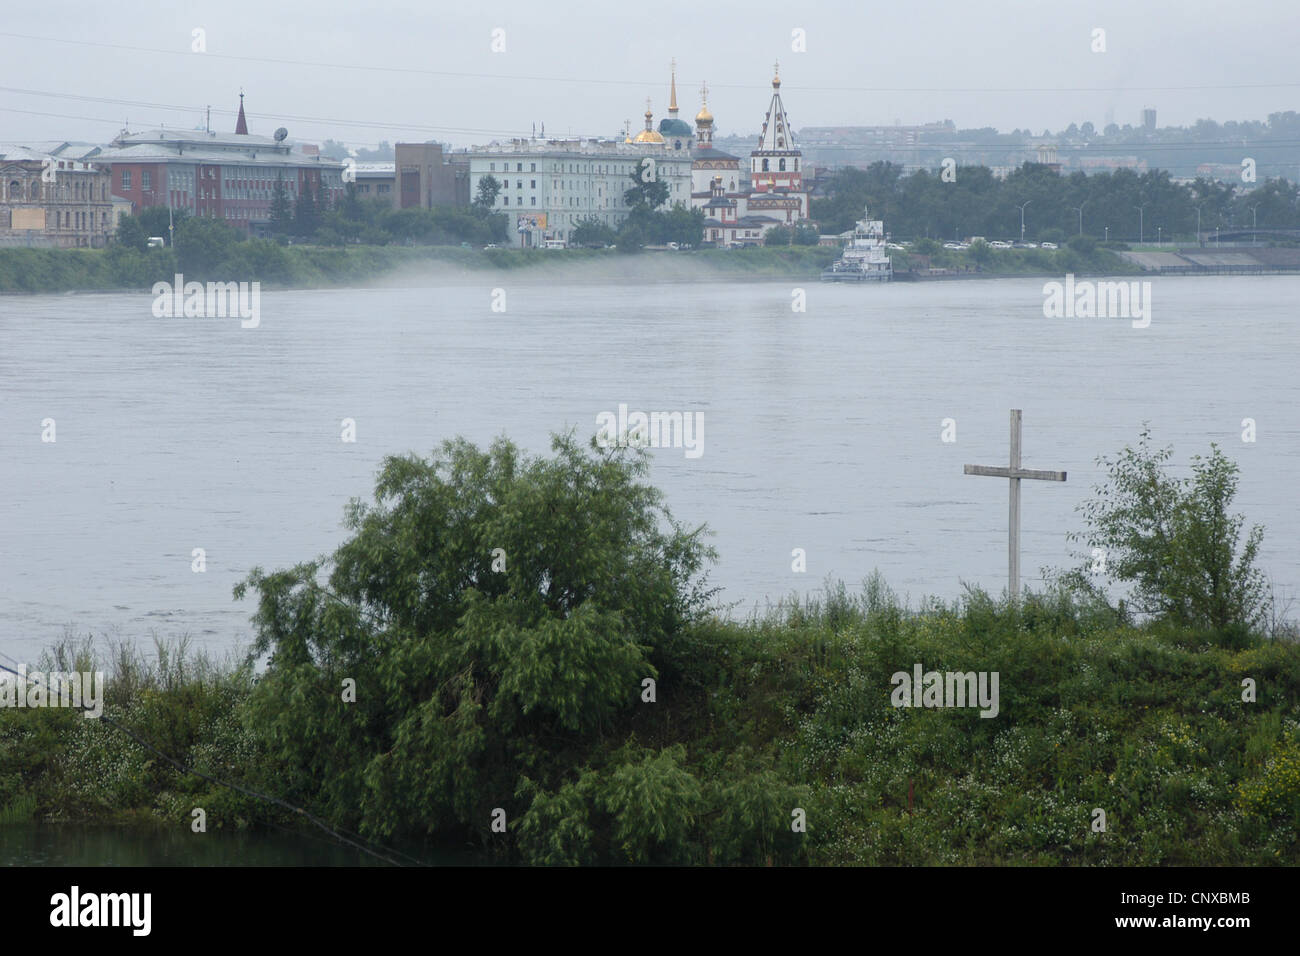 Cross on the place where Admiral Alexander Kolchak was executed in 1920 on the Angara River in Irkutsk, Russia. Stock Photo